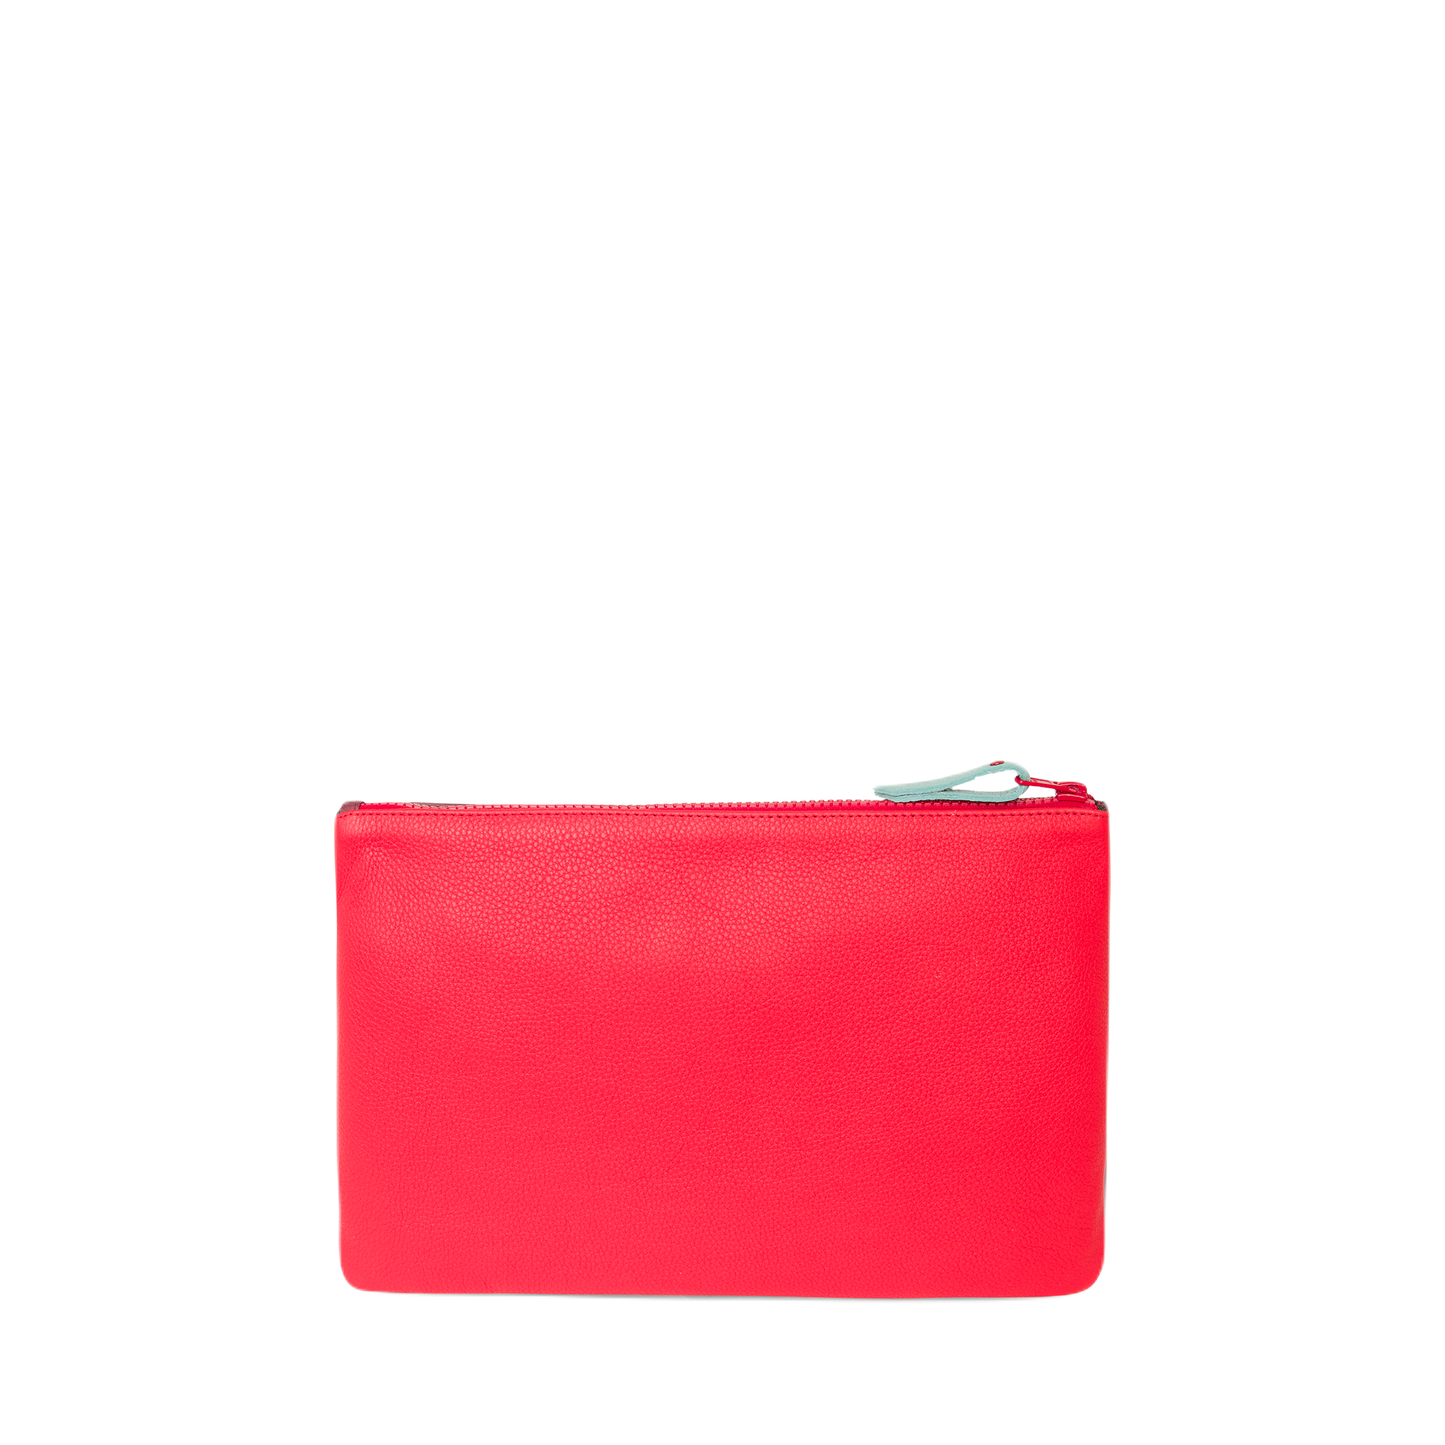 ZIP POUCH S Maroon and red